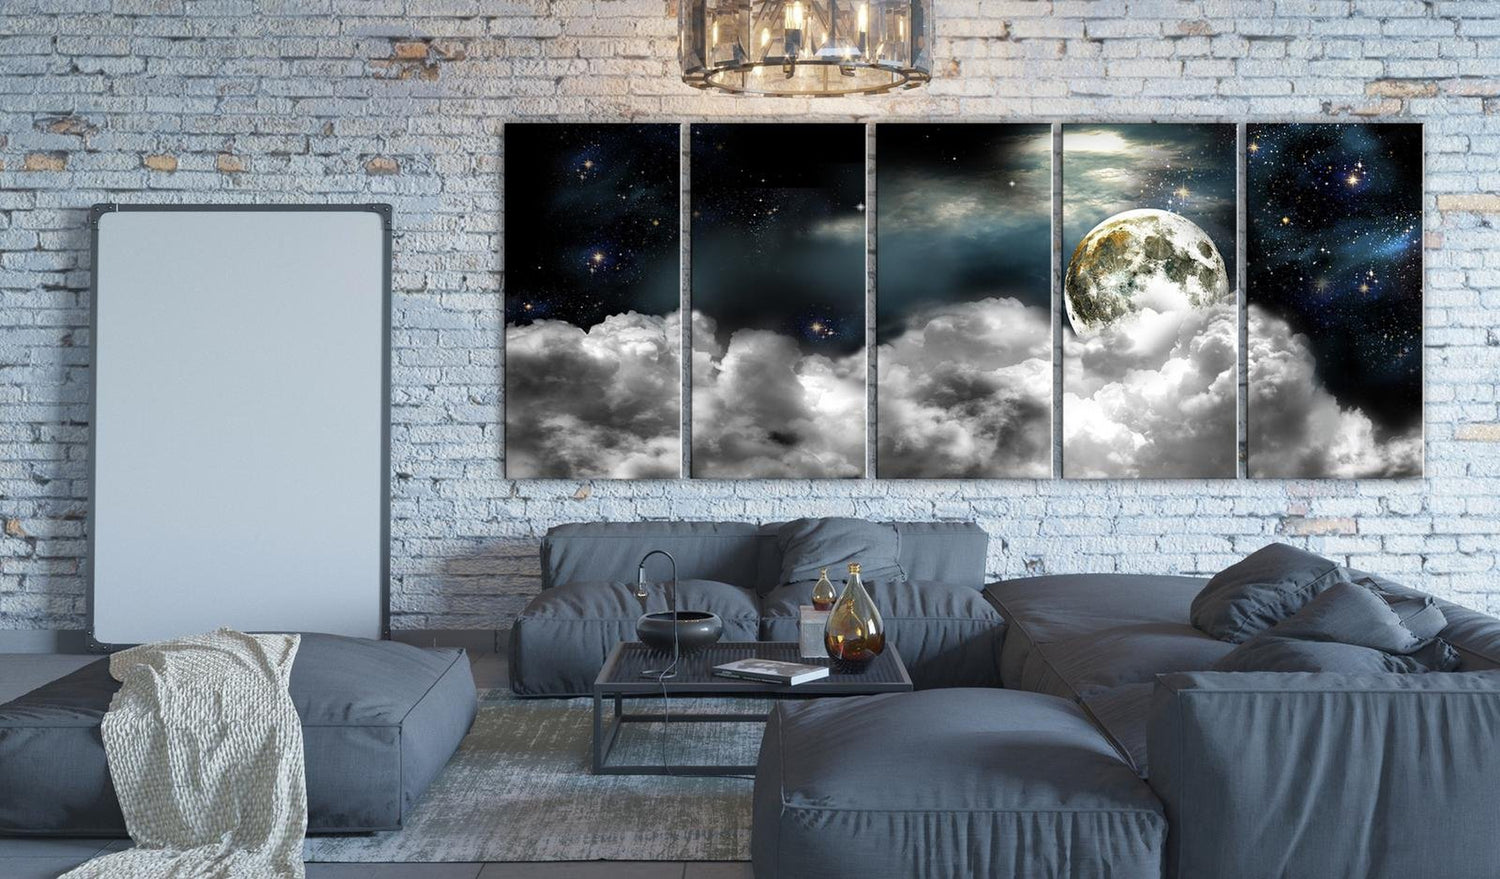 Stretched Canvas Landscape Art - Moon In The Clouds 5 Piece-Tiptophomedecor